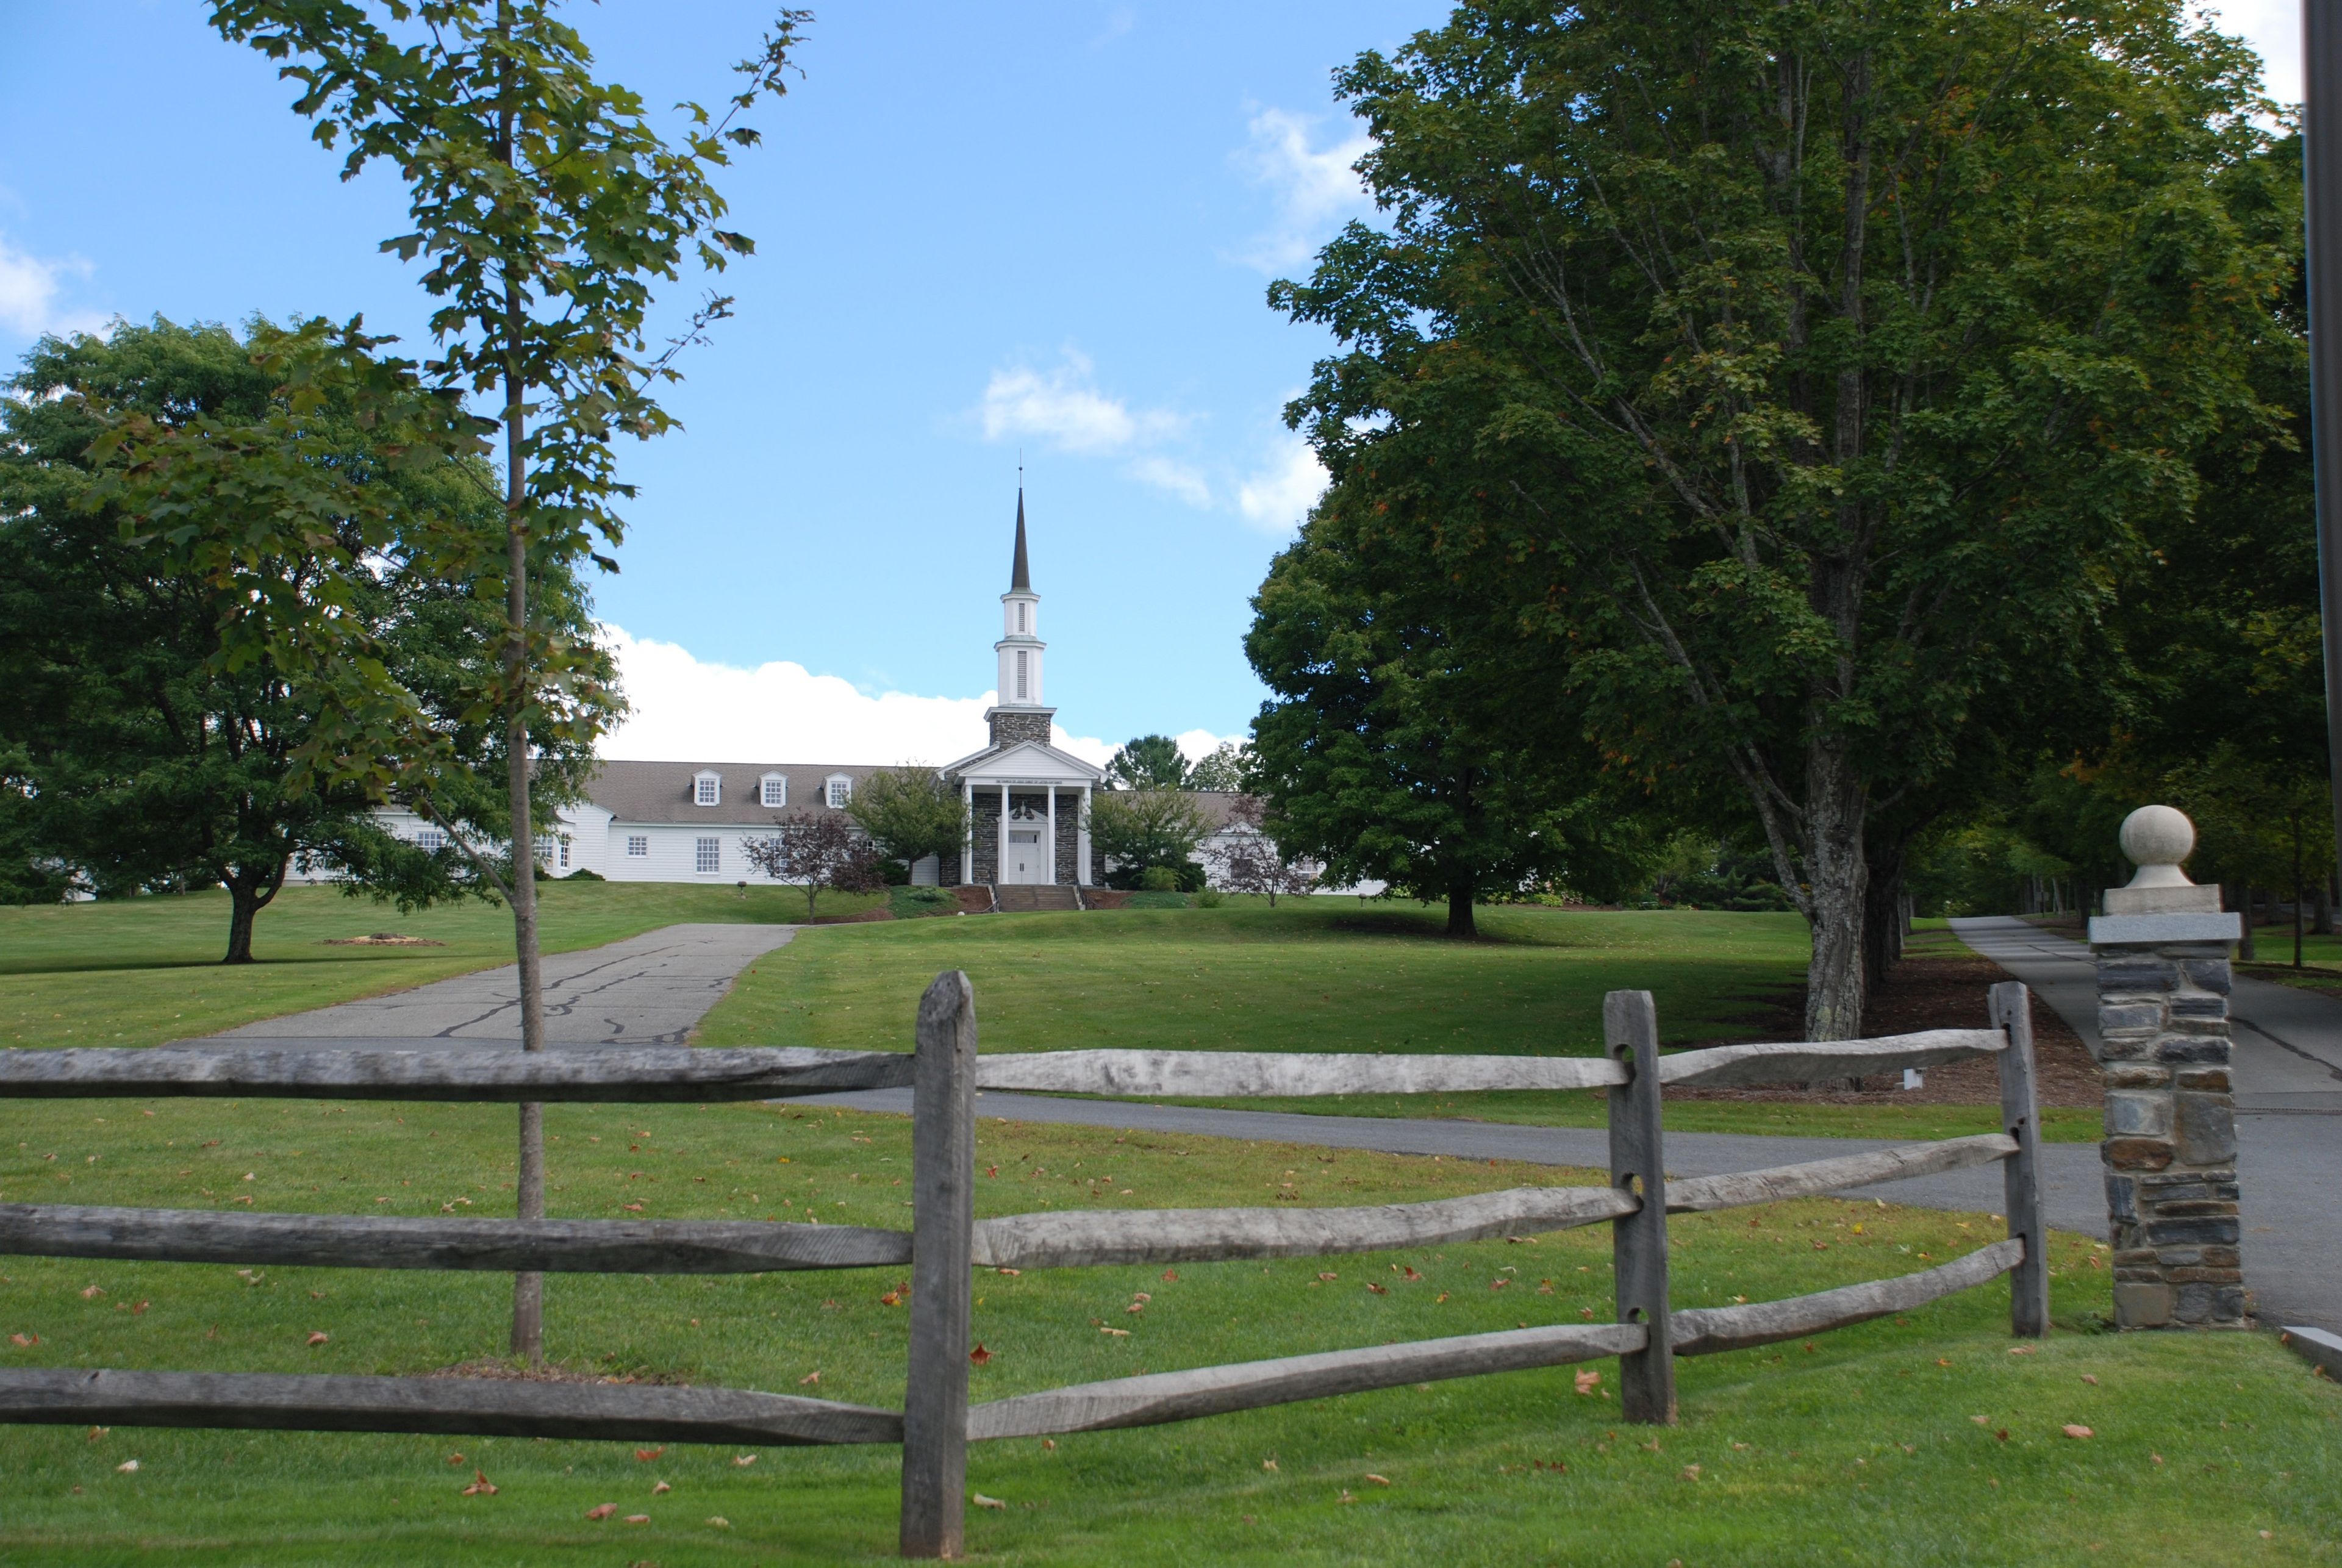 A historic meetinghouse in Sharon, Vermont, shown in the distance.